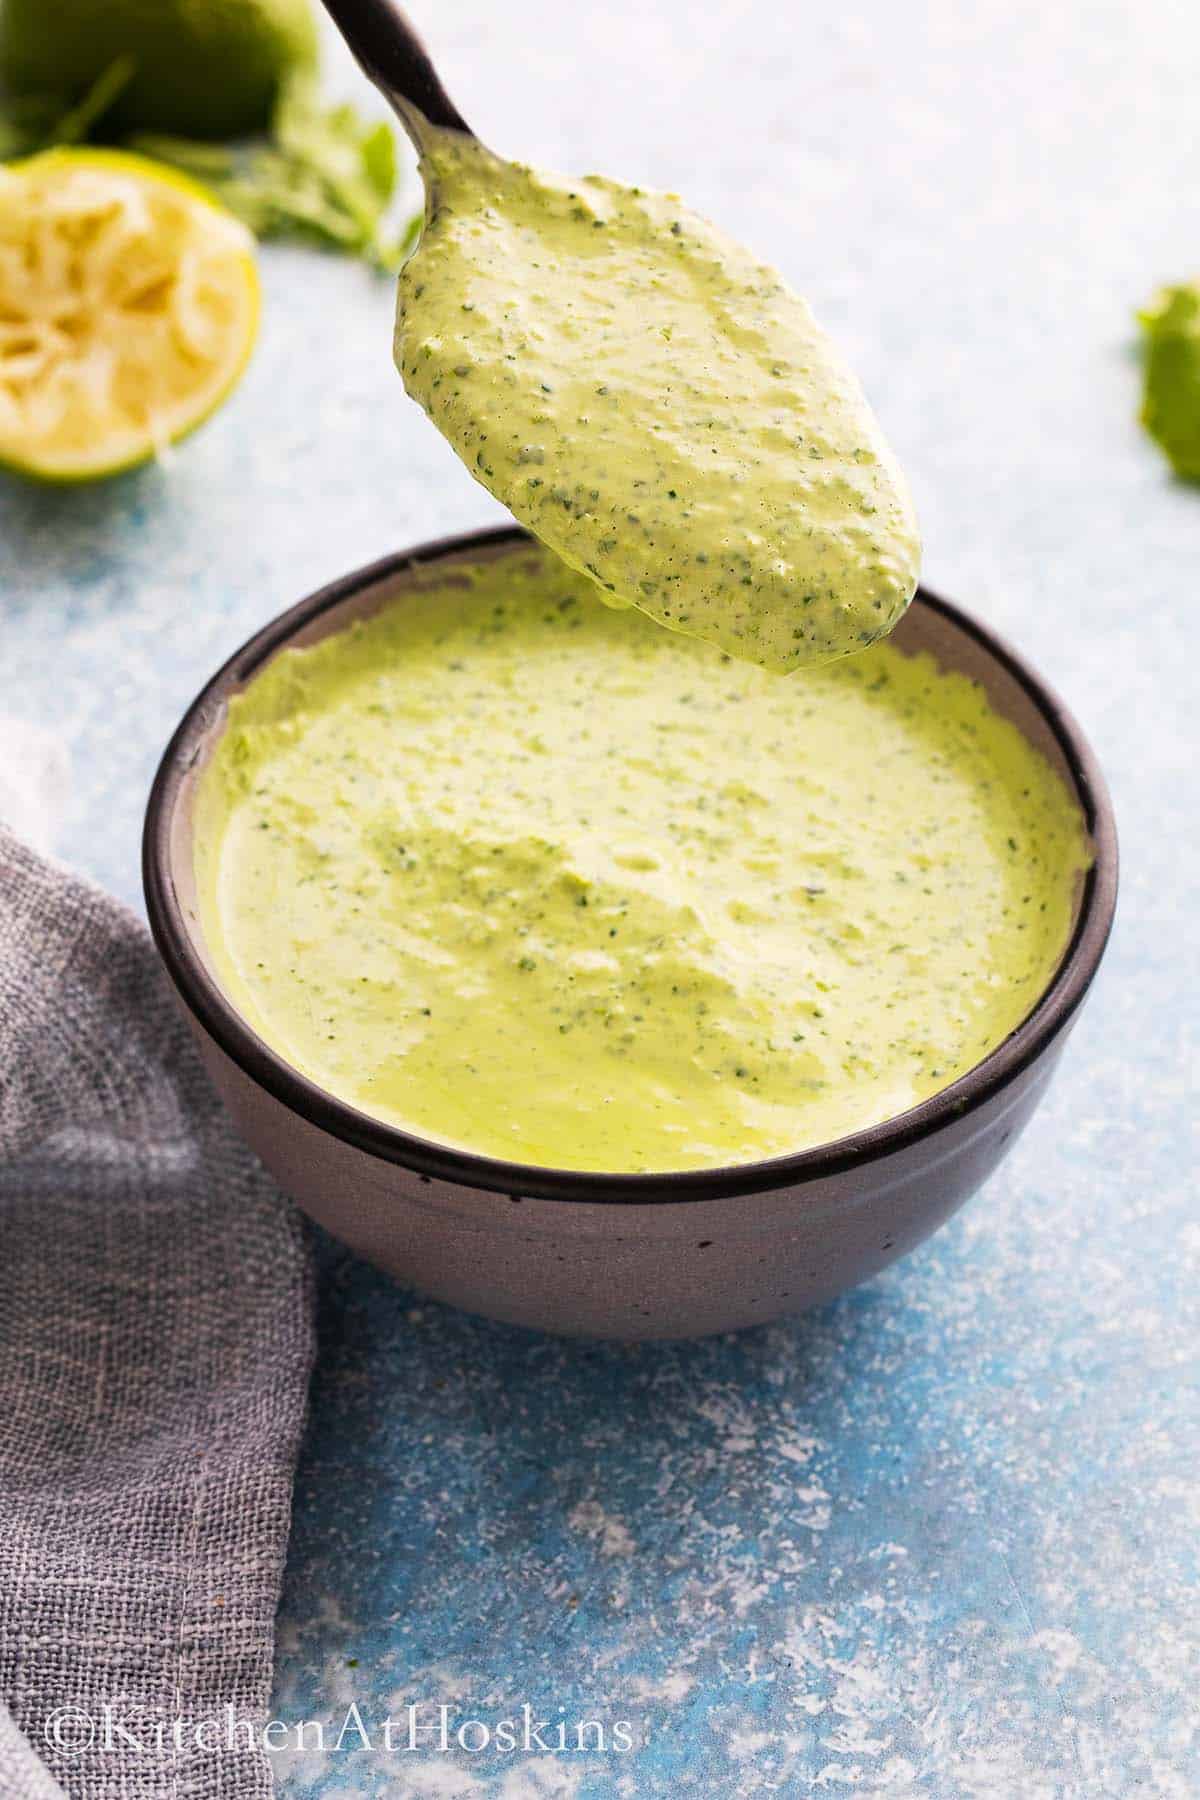 a spoonful of creamy green sauce over a bowl filled with the same.